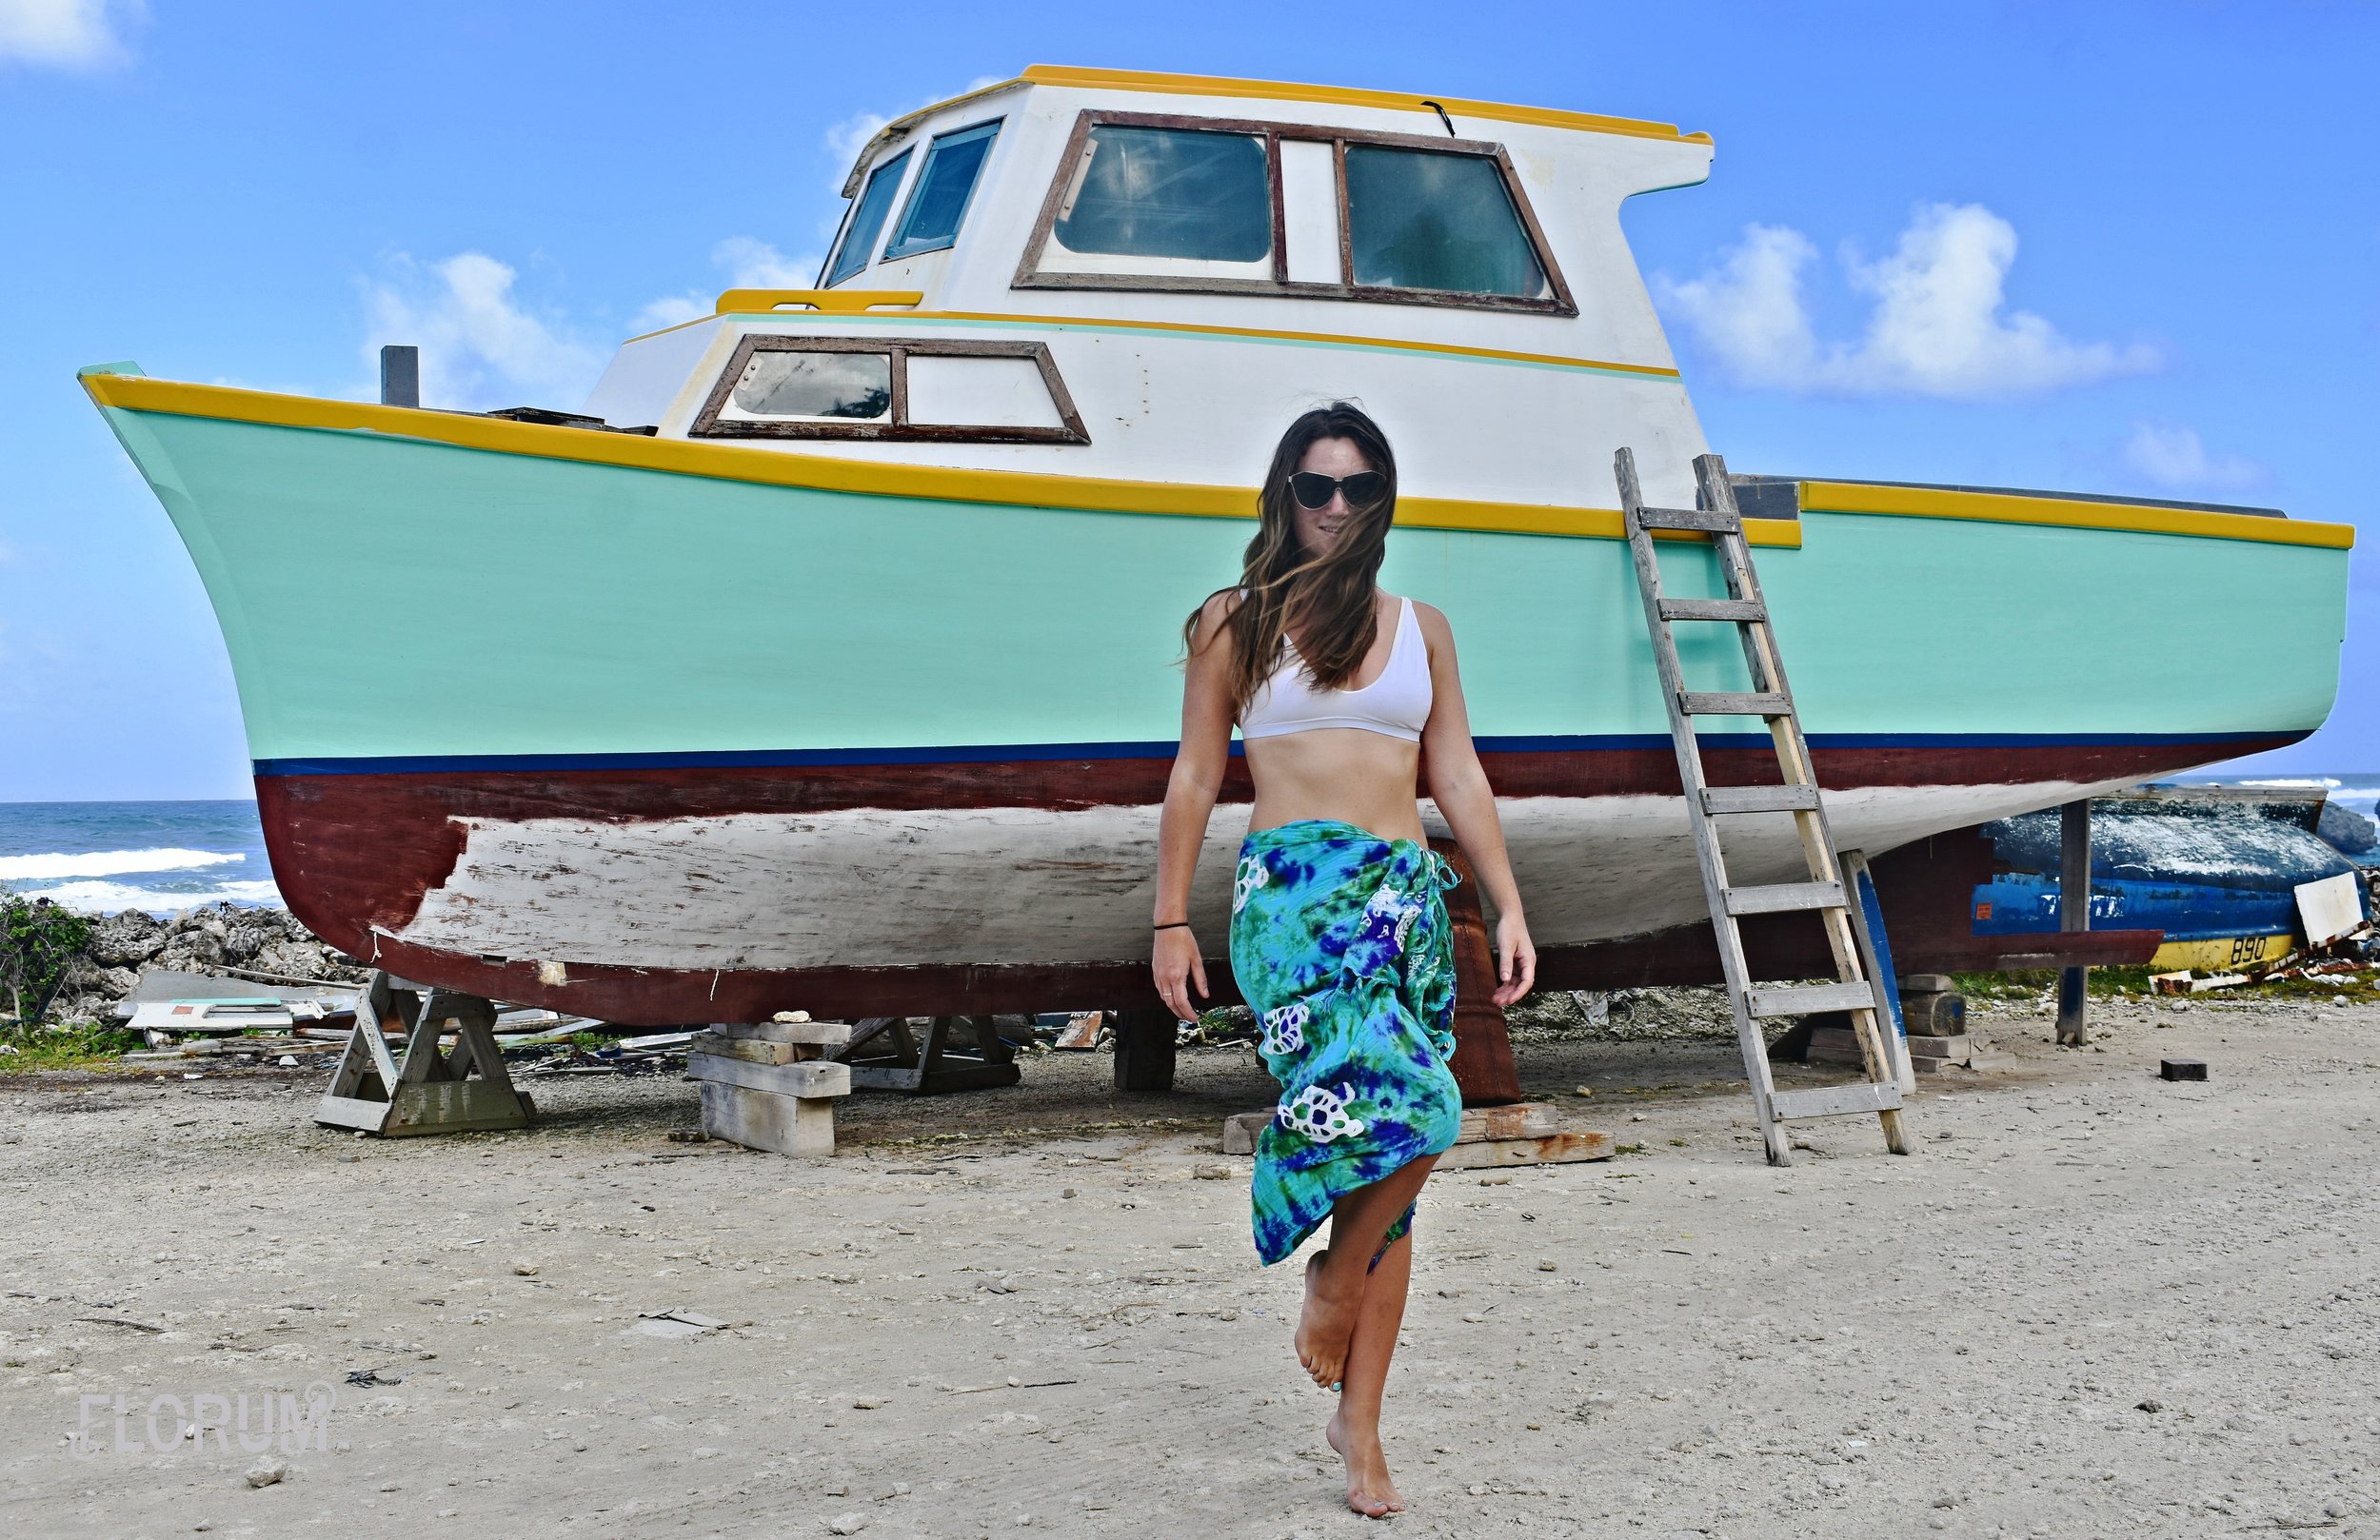 Barbados - Sea U Guest House - Green Travel for Florum Fashion Magazine by Noelle Lynne - allerton ethical swimwear responsible travel ethical living16.jpg